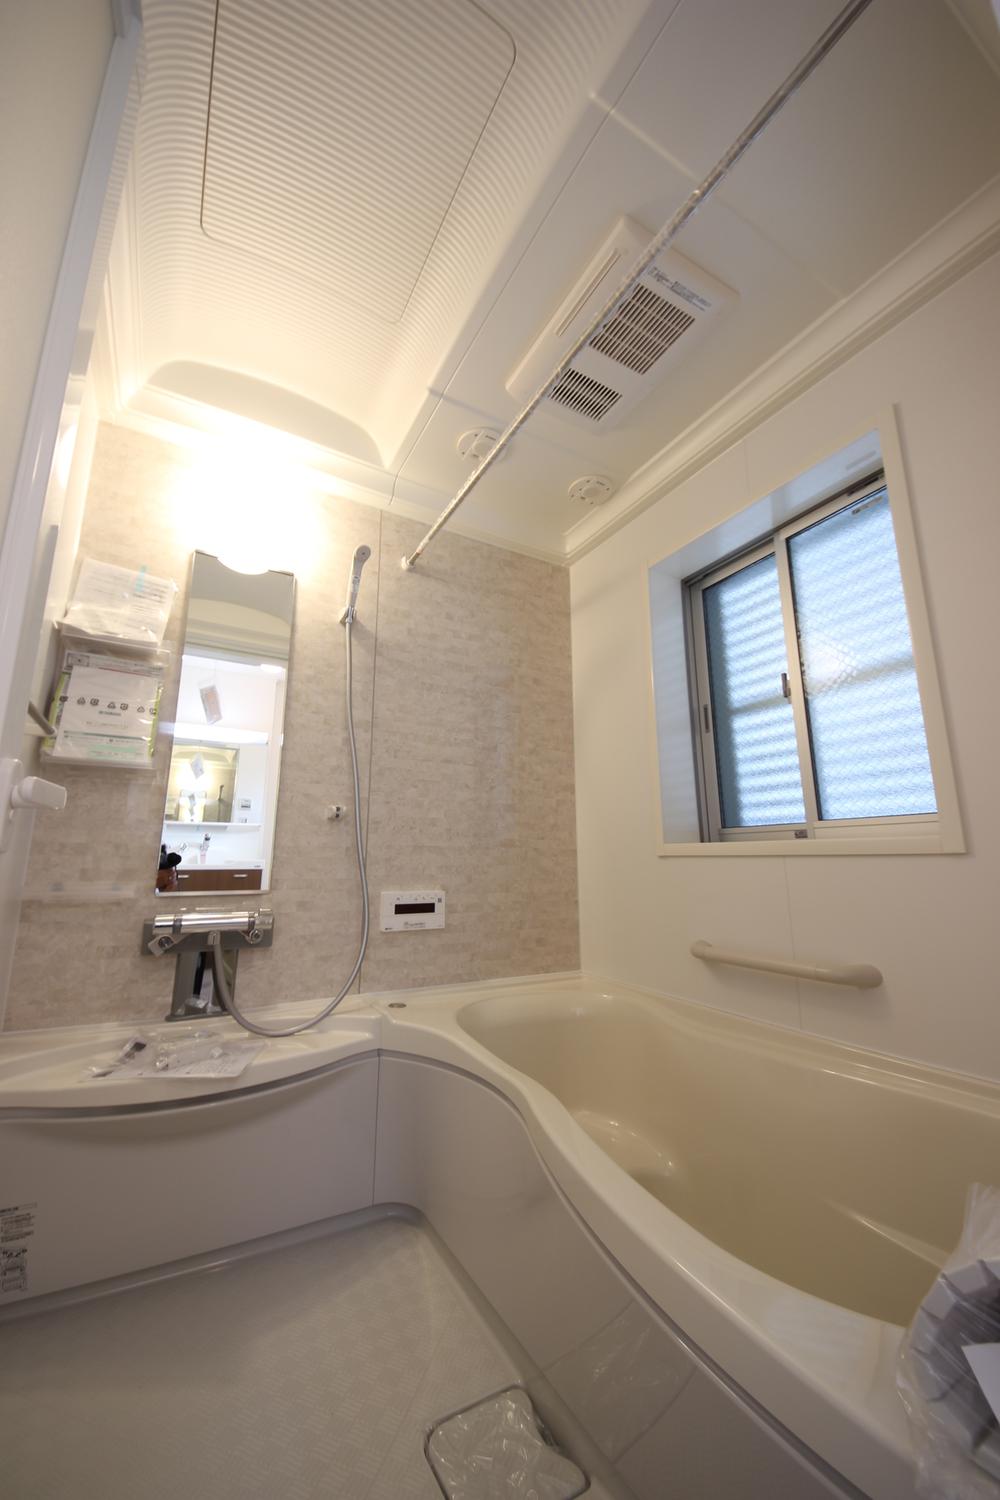 Same specifications photo (bathroom). Unit bus which was based on white. Ceiling also has designed high and has become a large space.